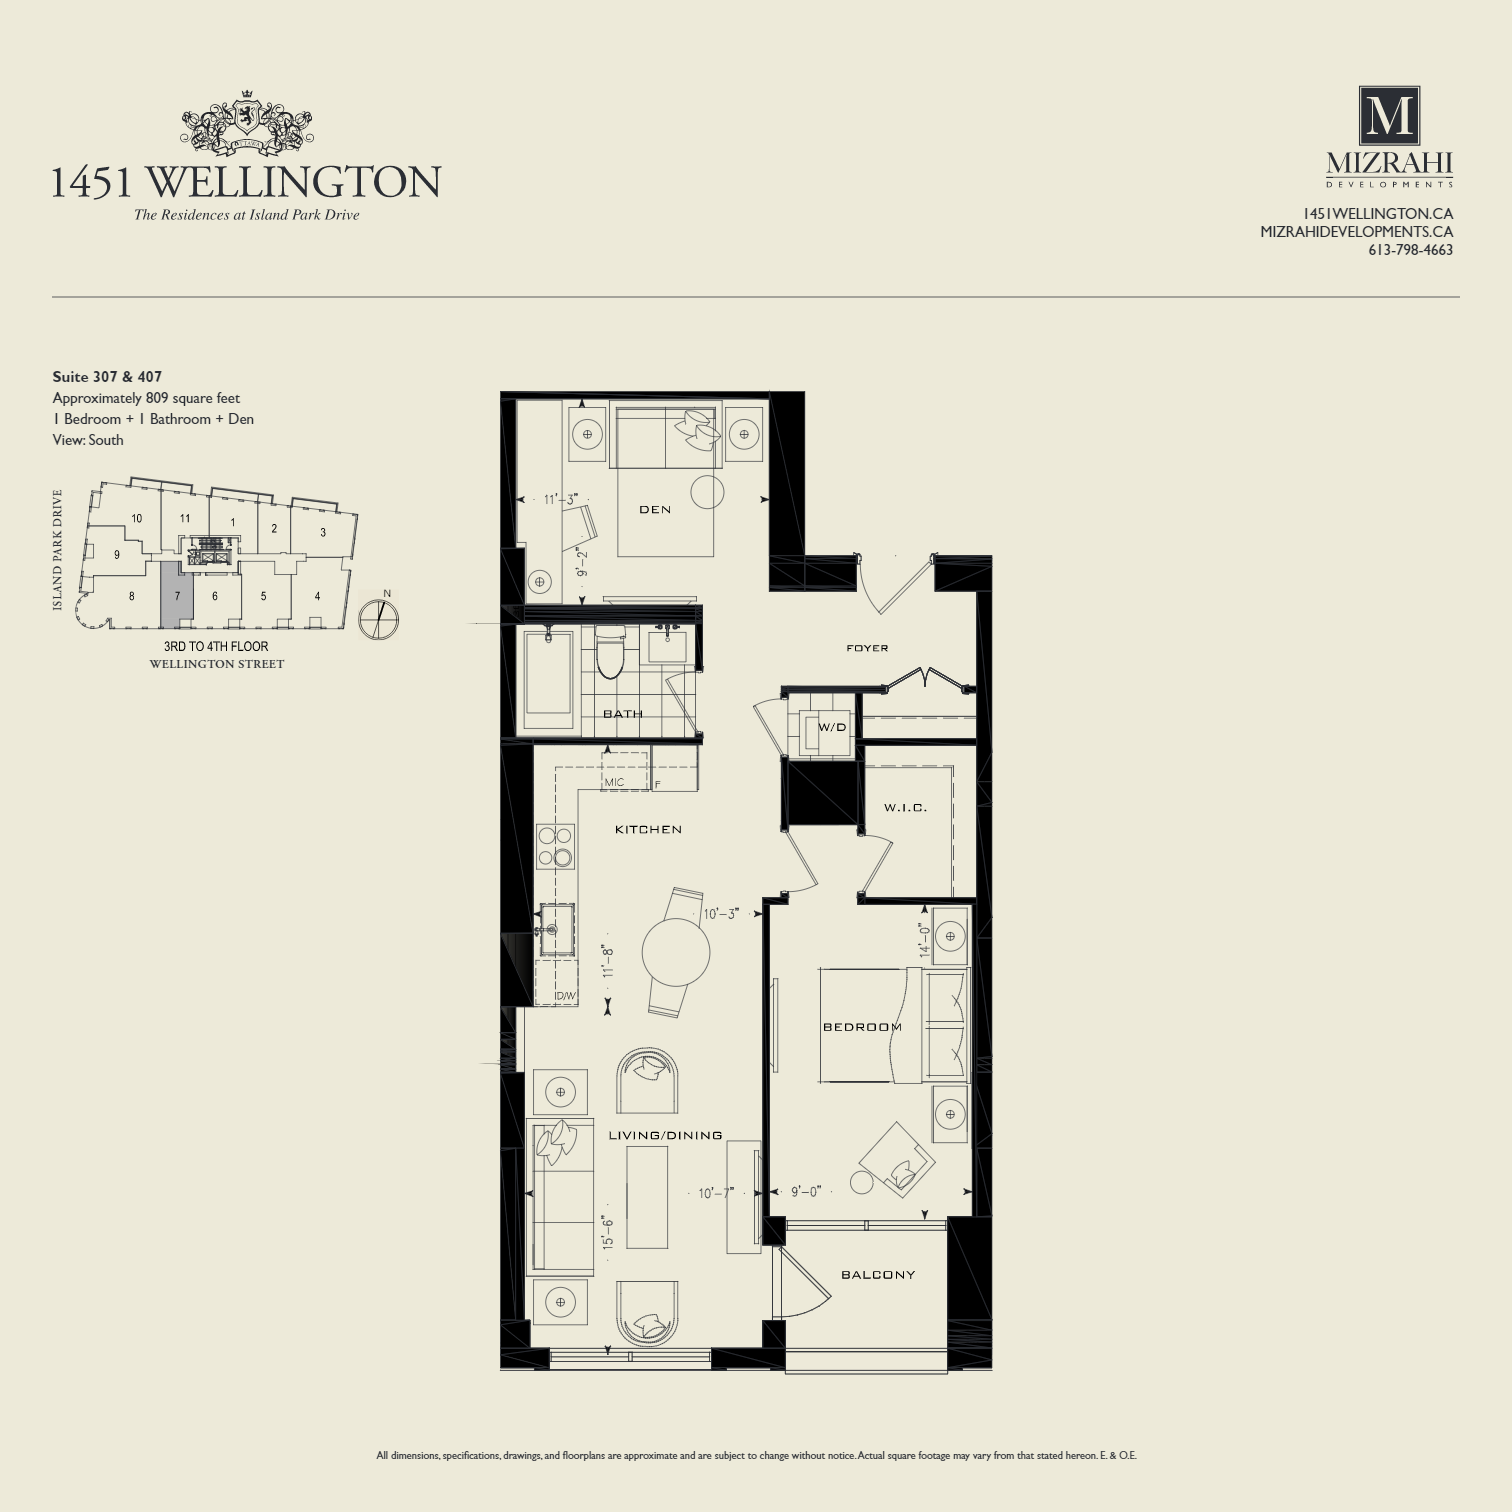 809 sq ft Floor Plan of The Residences at Island Park Drive Condos with undefined beds